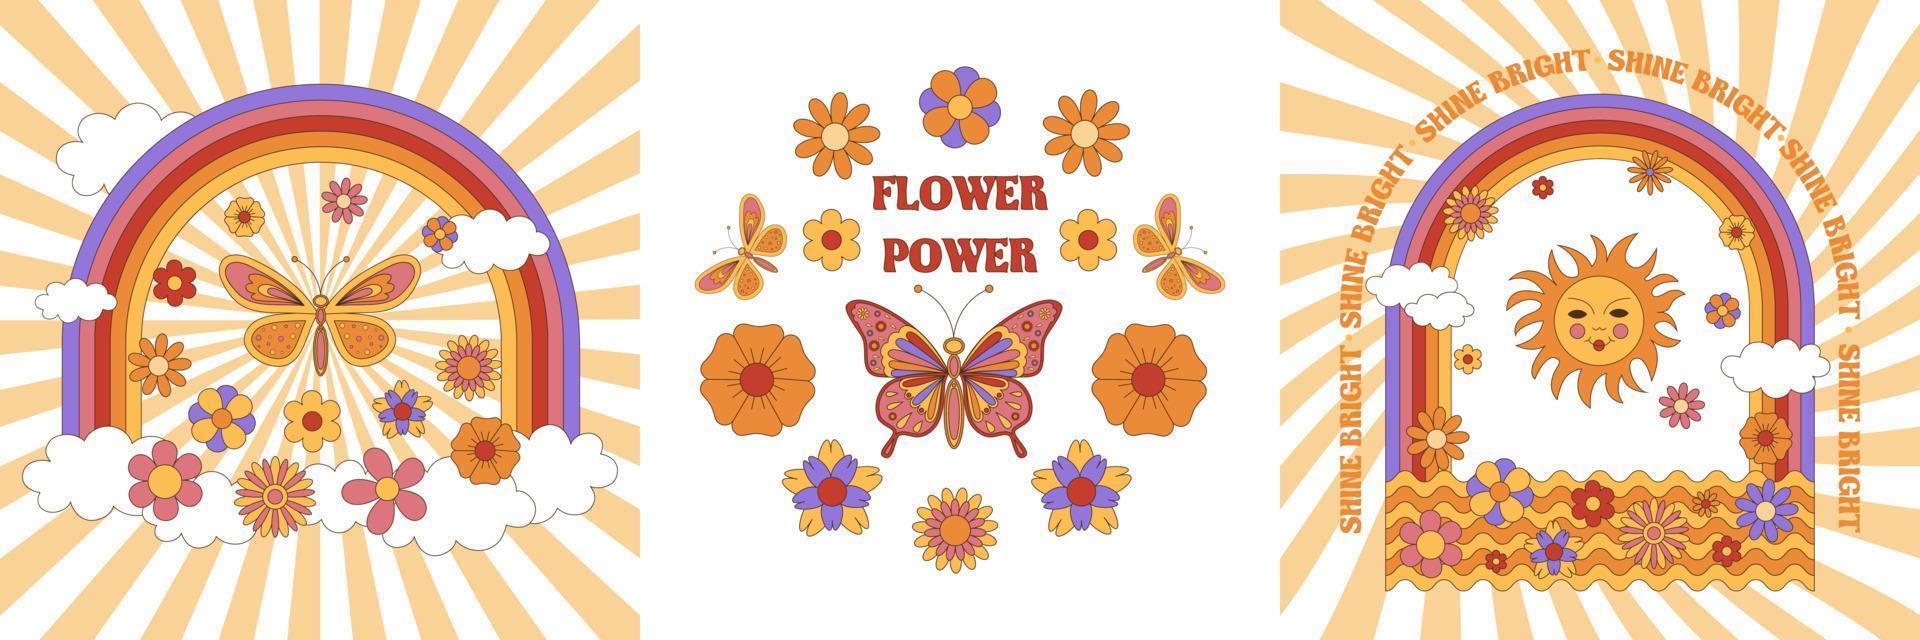 Set of groovy hippie 70s posters. Funny cartoon butterfly, rainbow, daisies, sun etc. Vector greeting cards in a trendy retro psychedelic cartoon style. Vector background. Stay groovy. Flower power